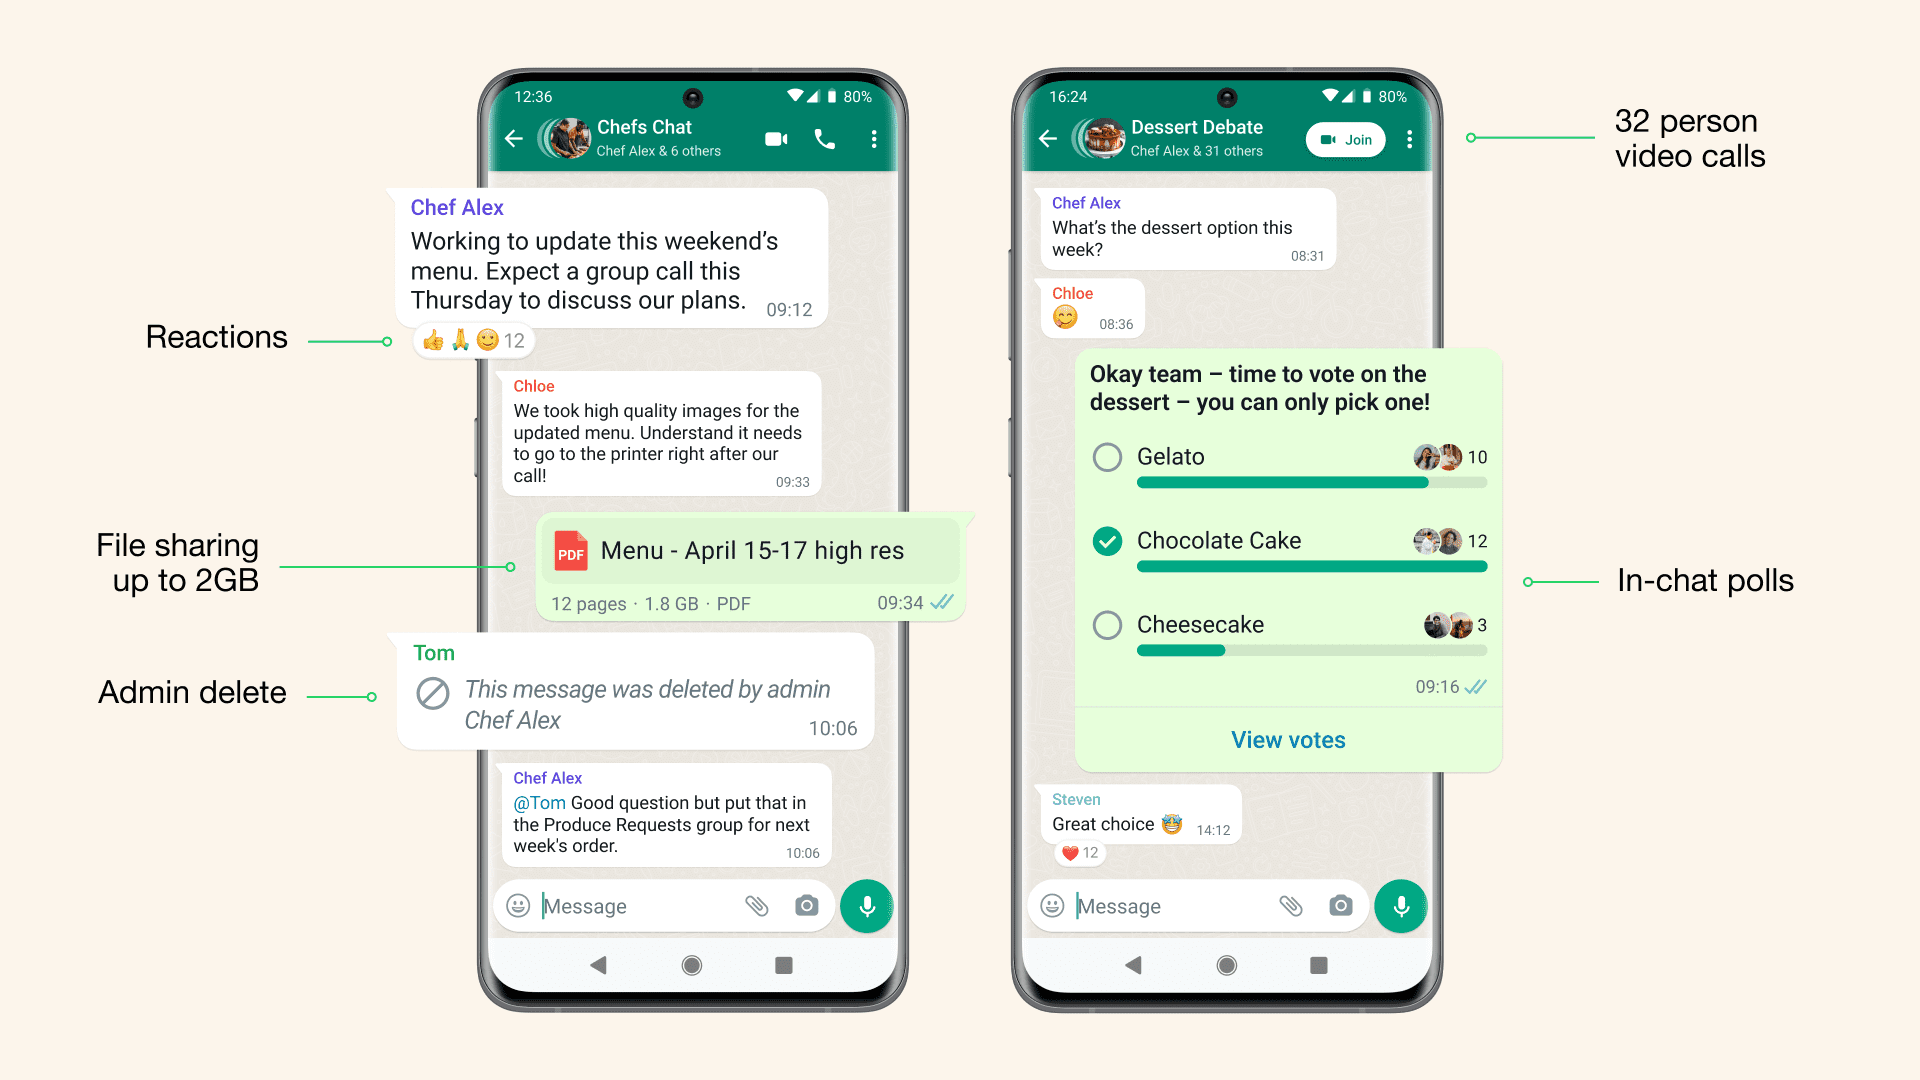 WhatsApp finally launches Communities and 3 new features